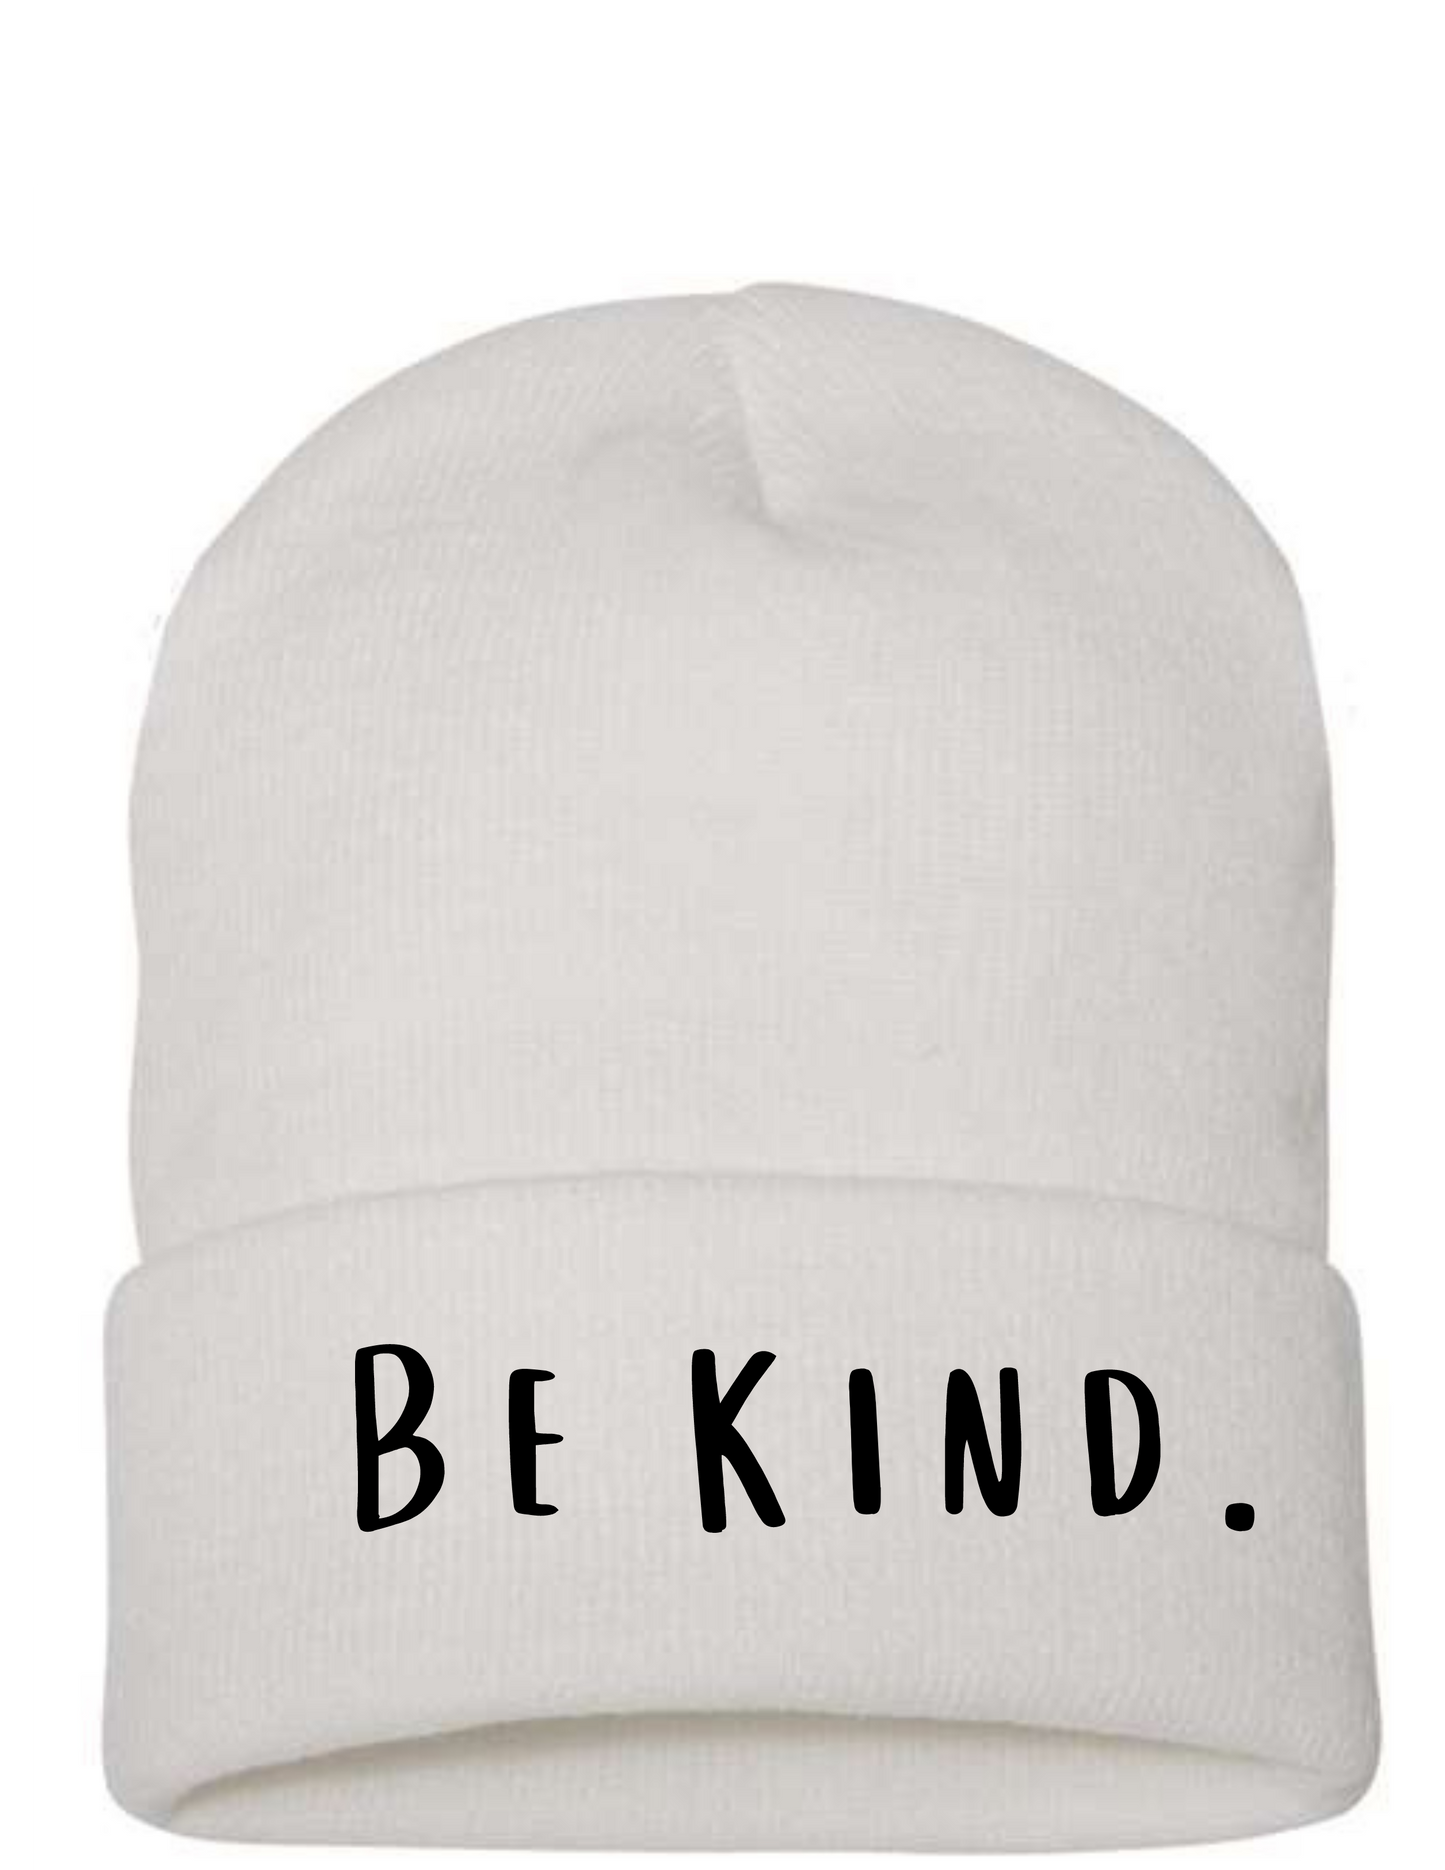 Be Kind Embroidered Beanie